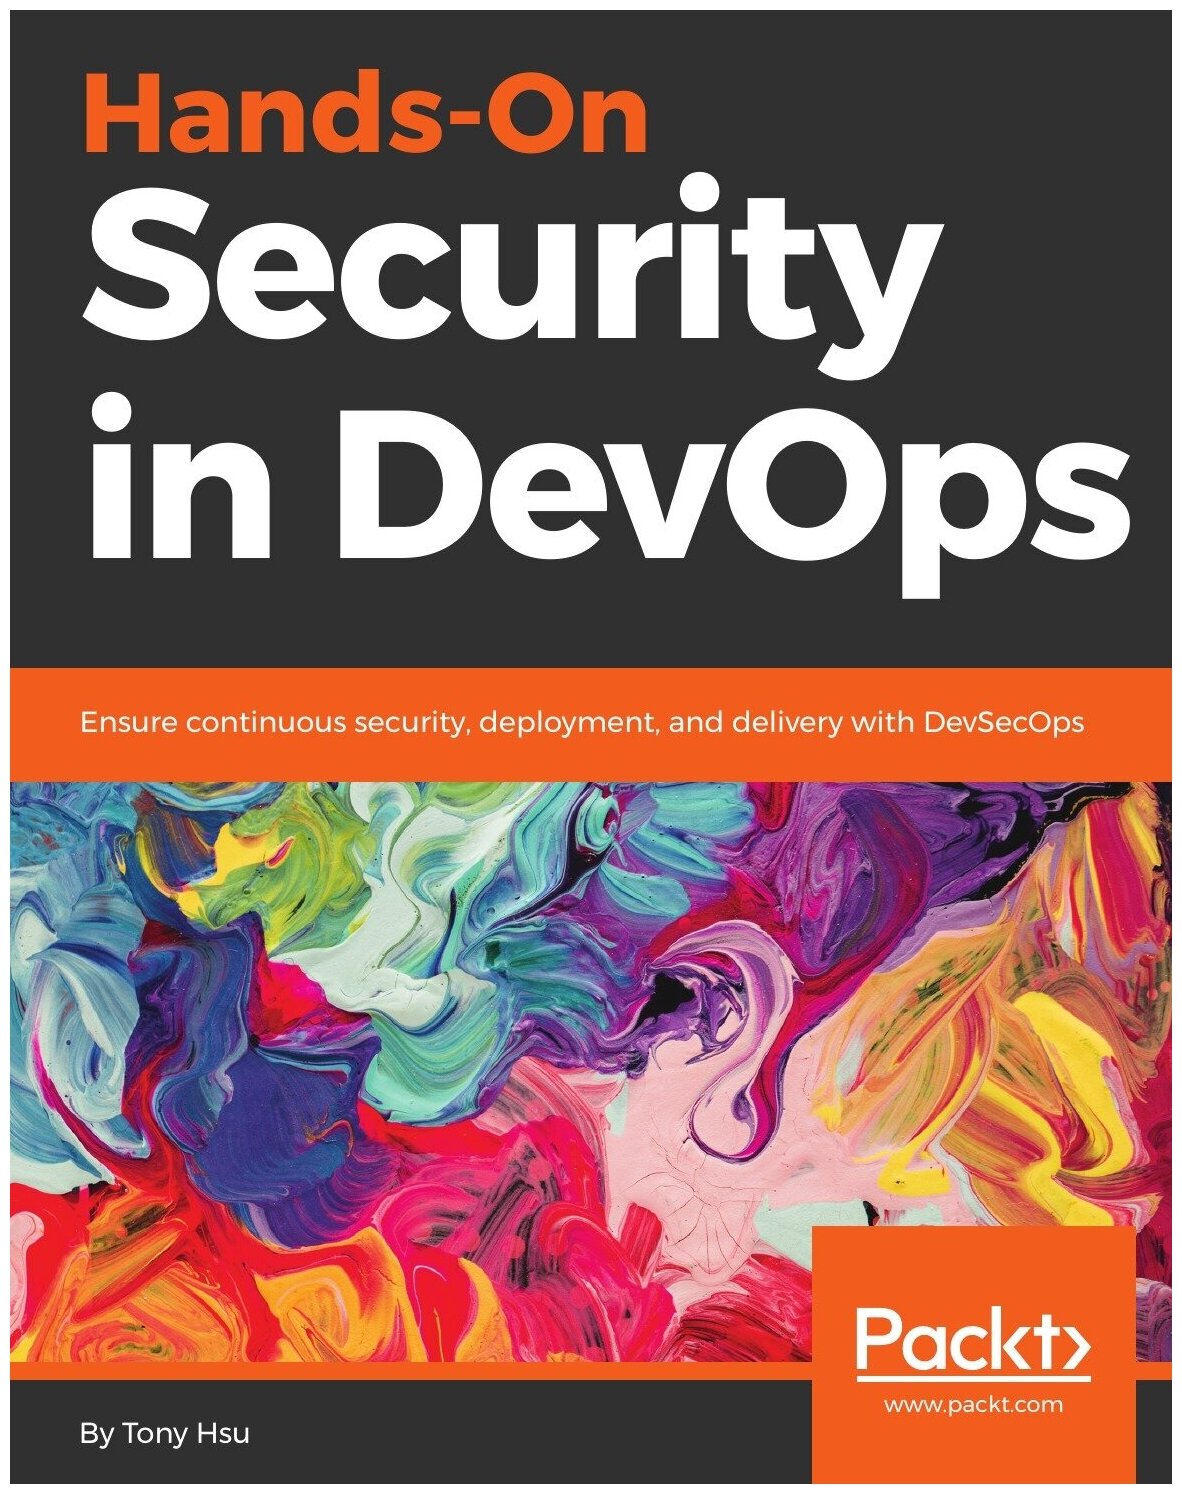 Hands-On Security in DevOps. Ensure continuous security, deployment, and delivery with DevSecOps